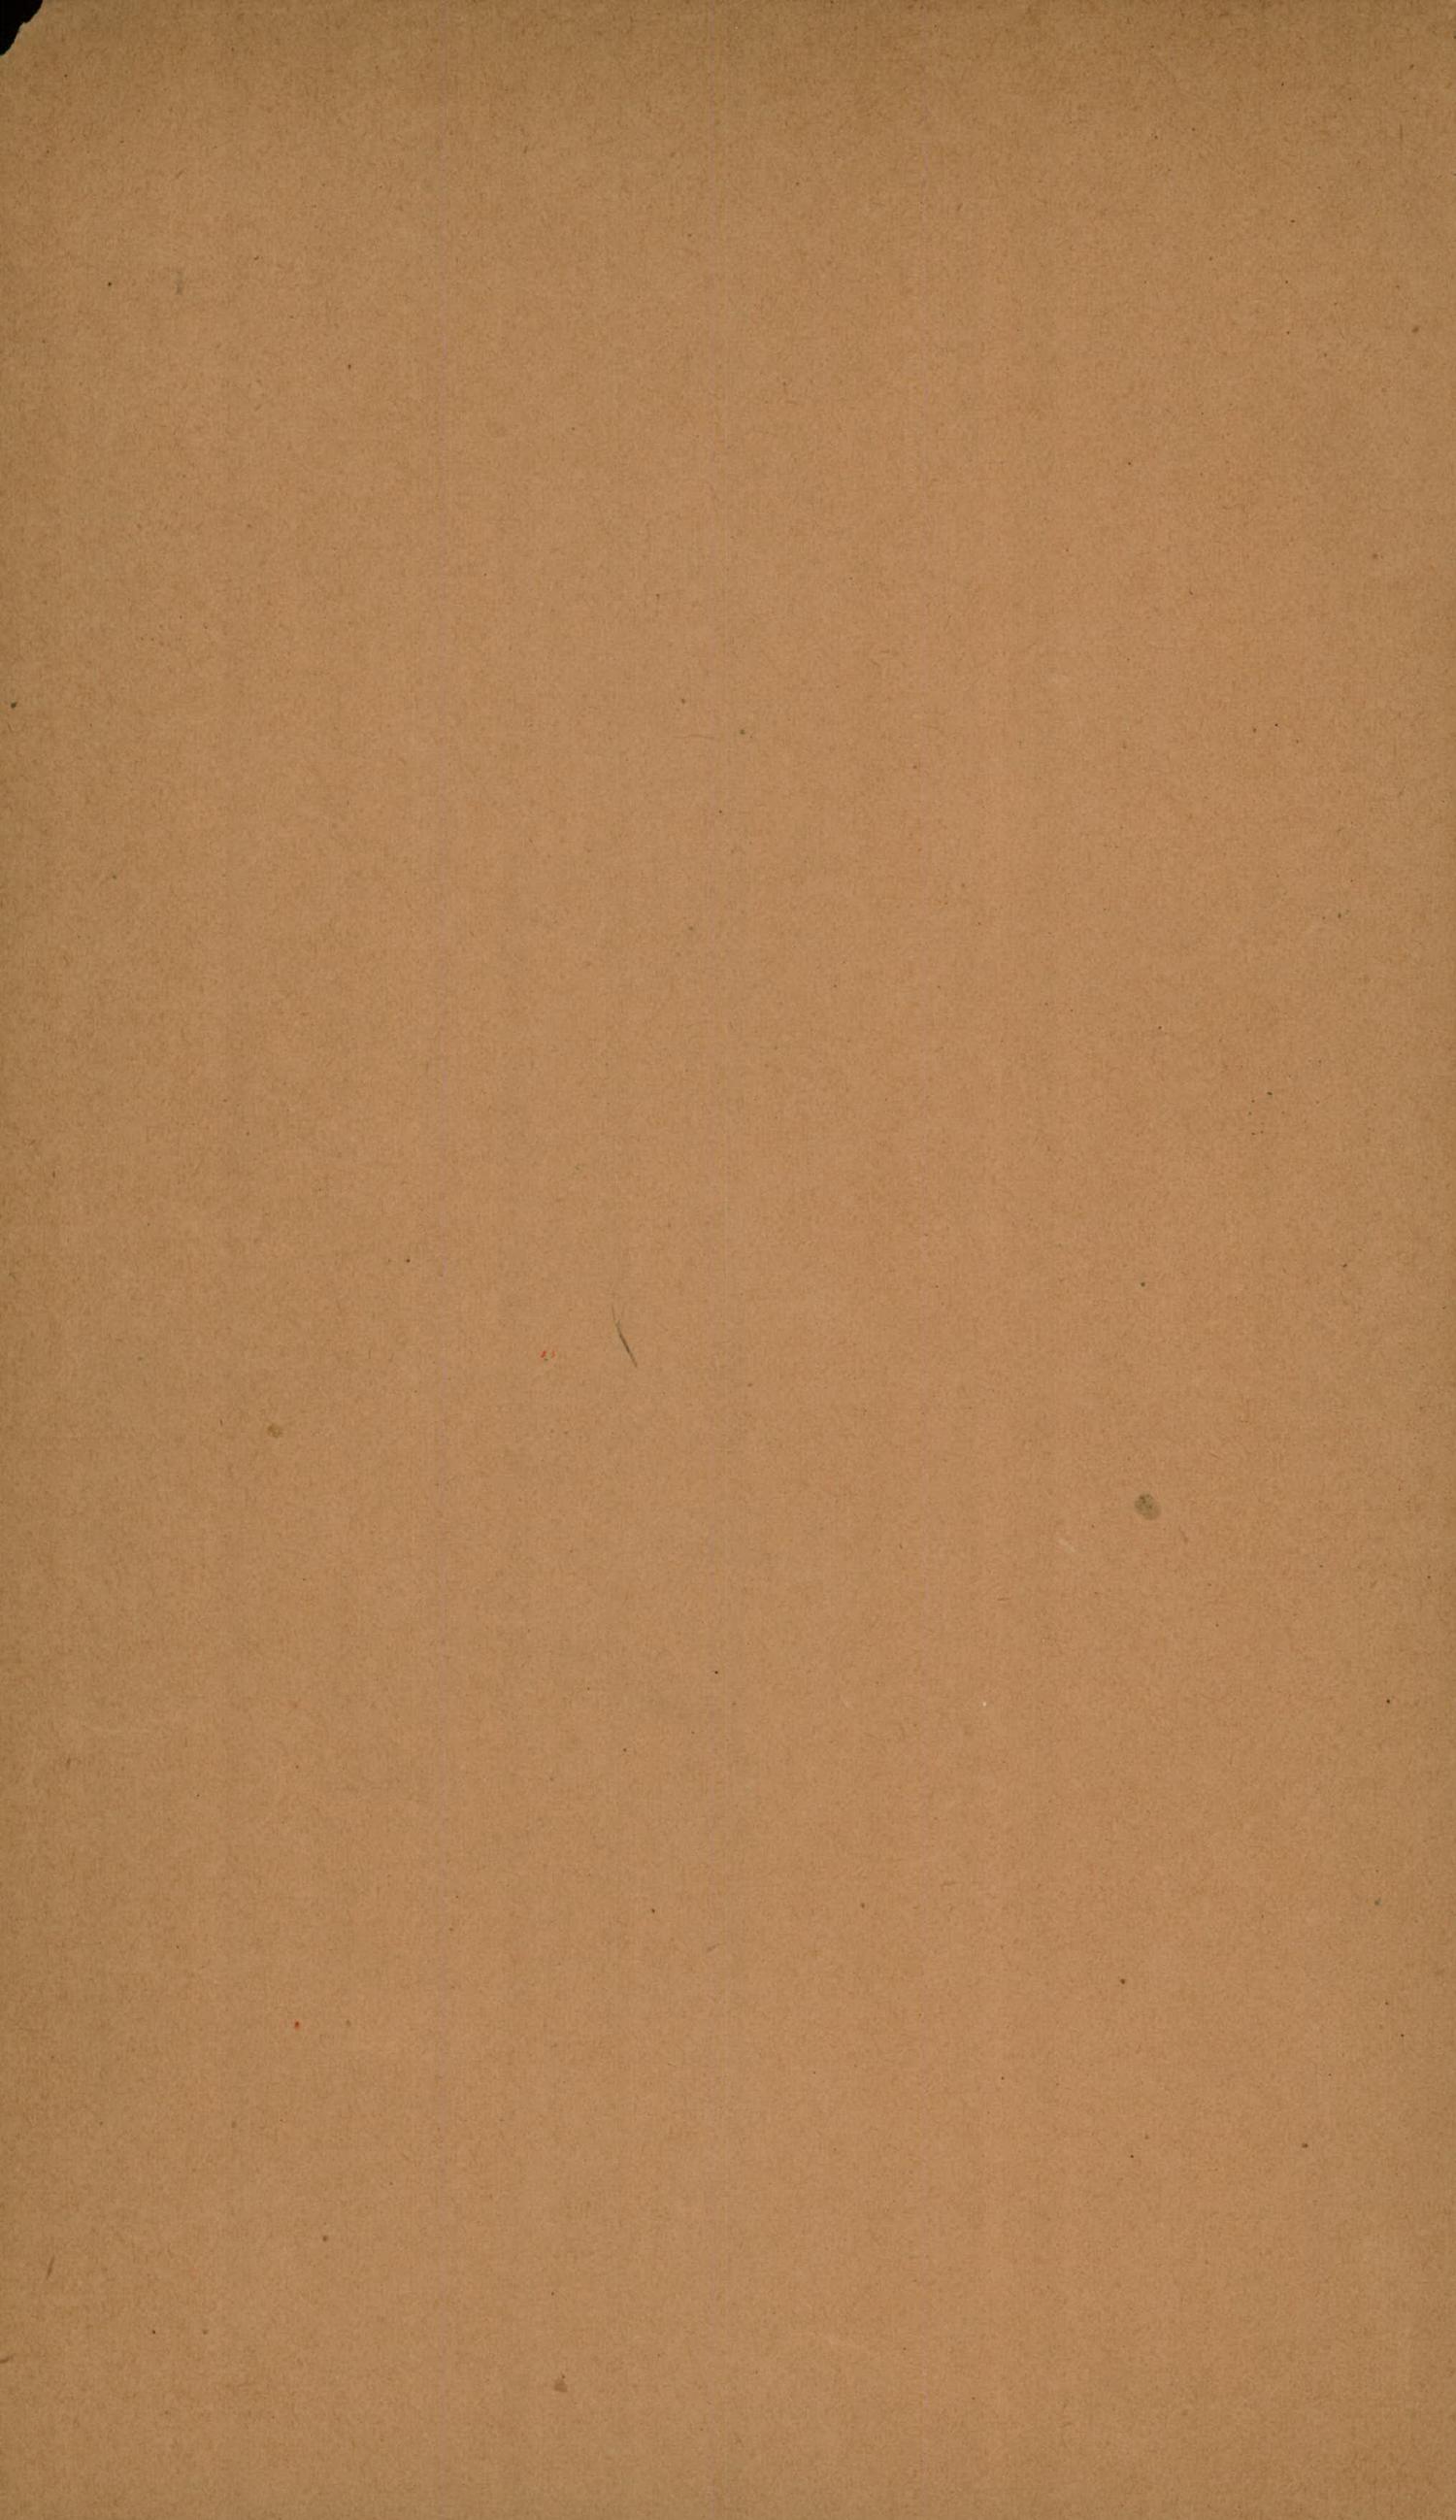 Report of the Comptroller of Public Accounts of the State of Texas: 1889
                                                
                                                    INSIDE FRONT COVER
                                                